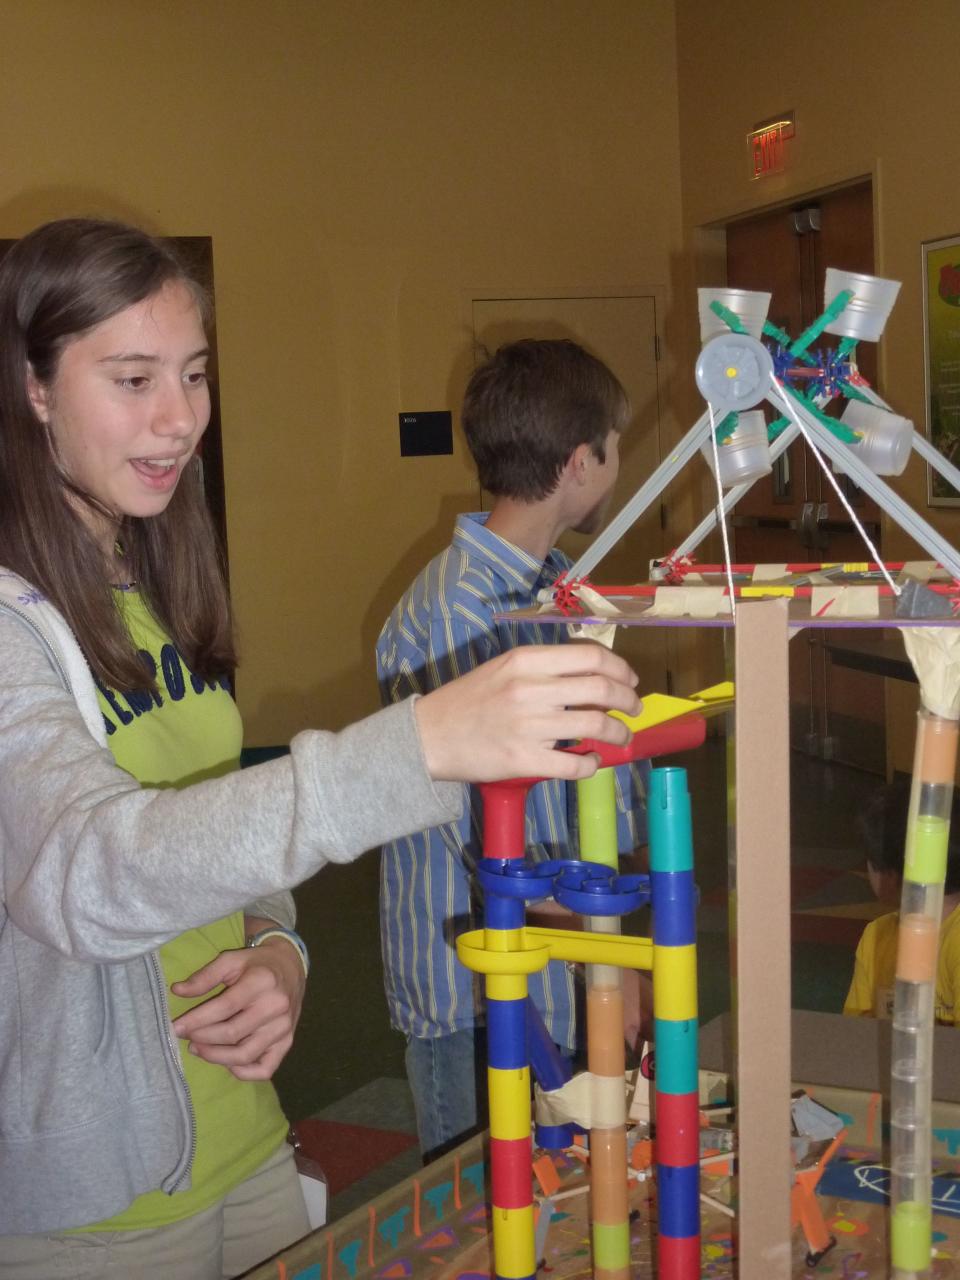 The annual tournament focuses on a middle school student’s ability to transform everyday objects into kinetic systems modeled after Rube Goldberg’s machines.